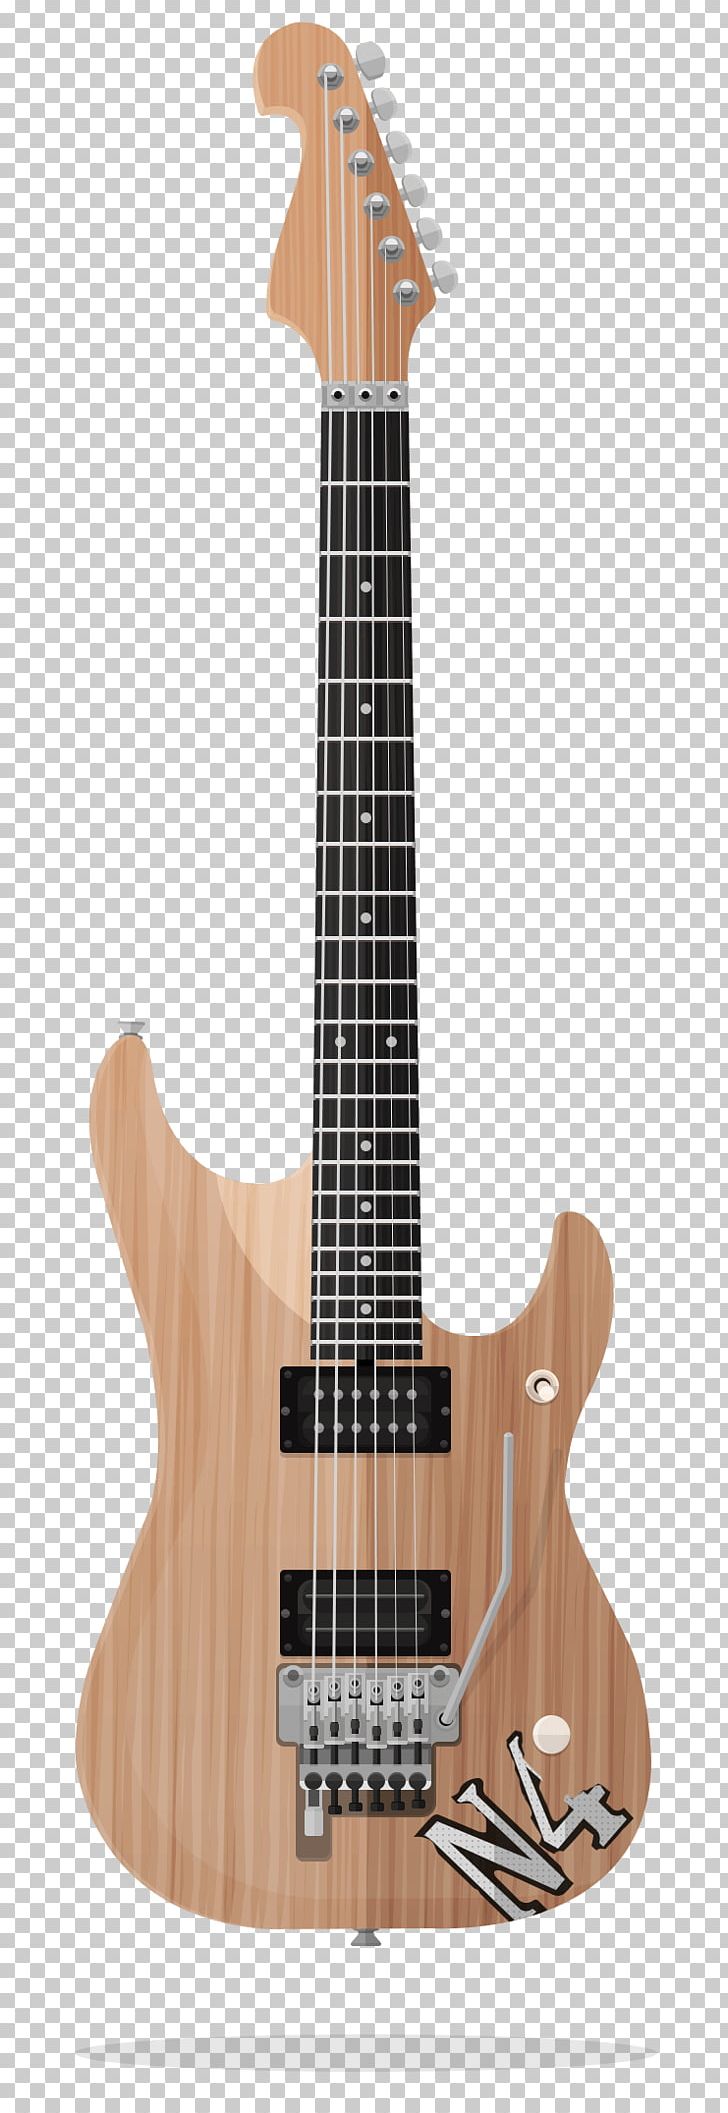 Bass Guitar Electric Guitar Ukulele Acoustic Guitar PNG, Clipart, Acoustic Electric Guitar, Authentic, Guitar Accessory, Pickup, Plucked String Instruments Free PNG Download